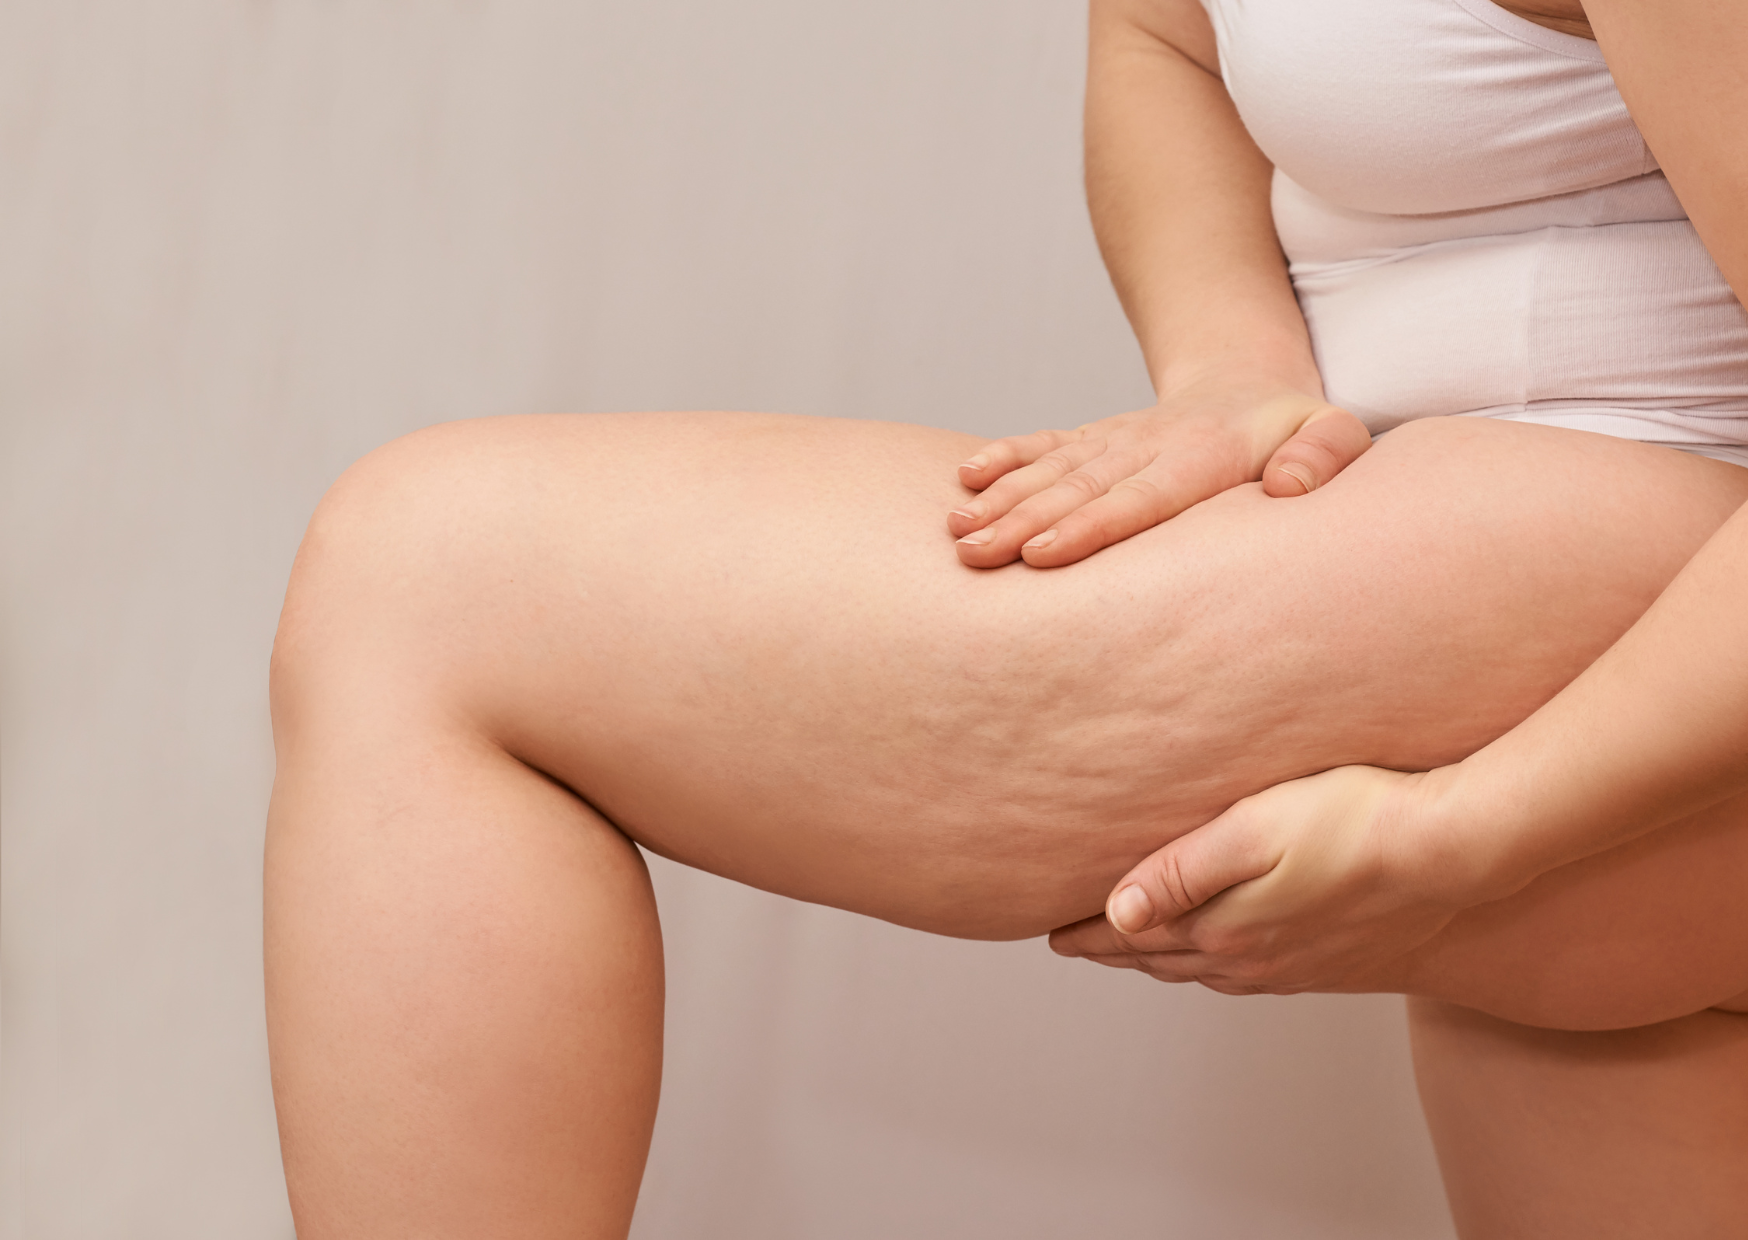 Red Light Therapy for Cellulite: Does It Really Work?